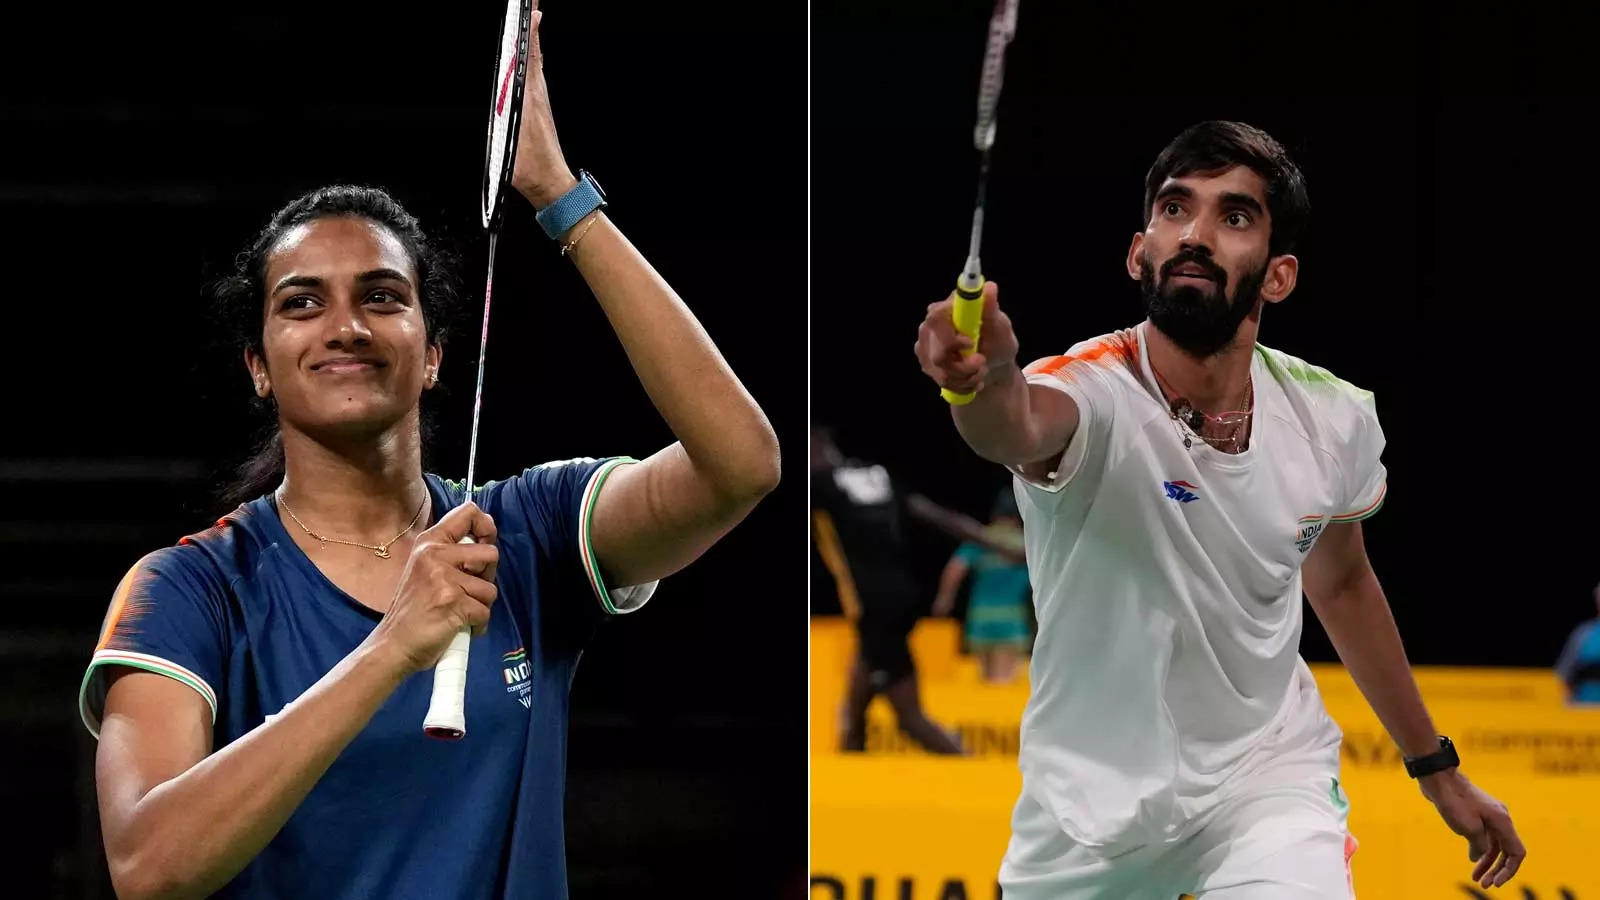 PV Sindhu and Kidambi Srikanth will be in action on Day 8 of CWG 2022